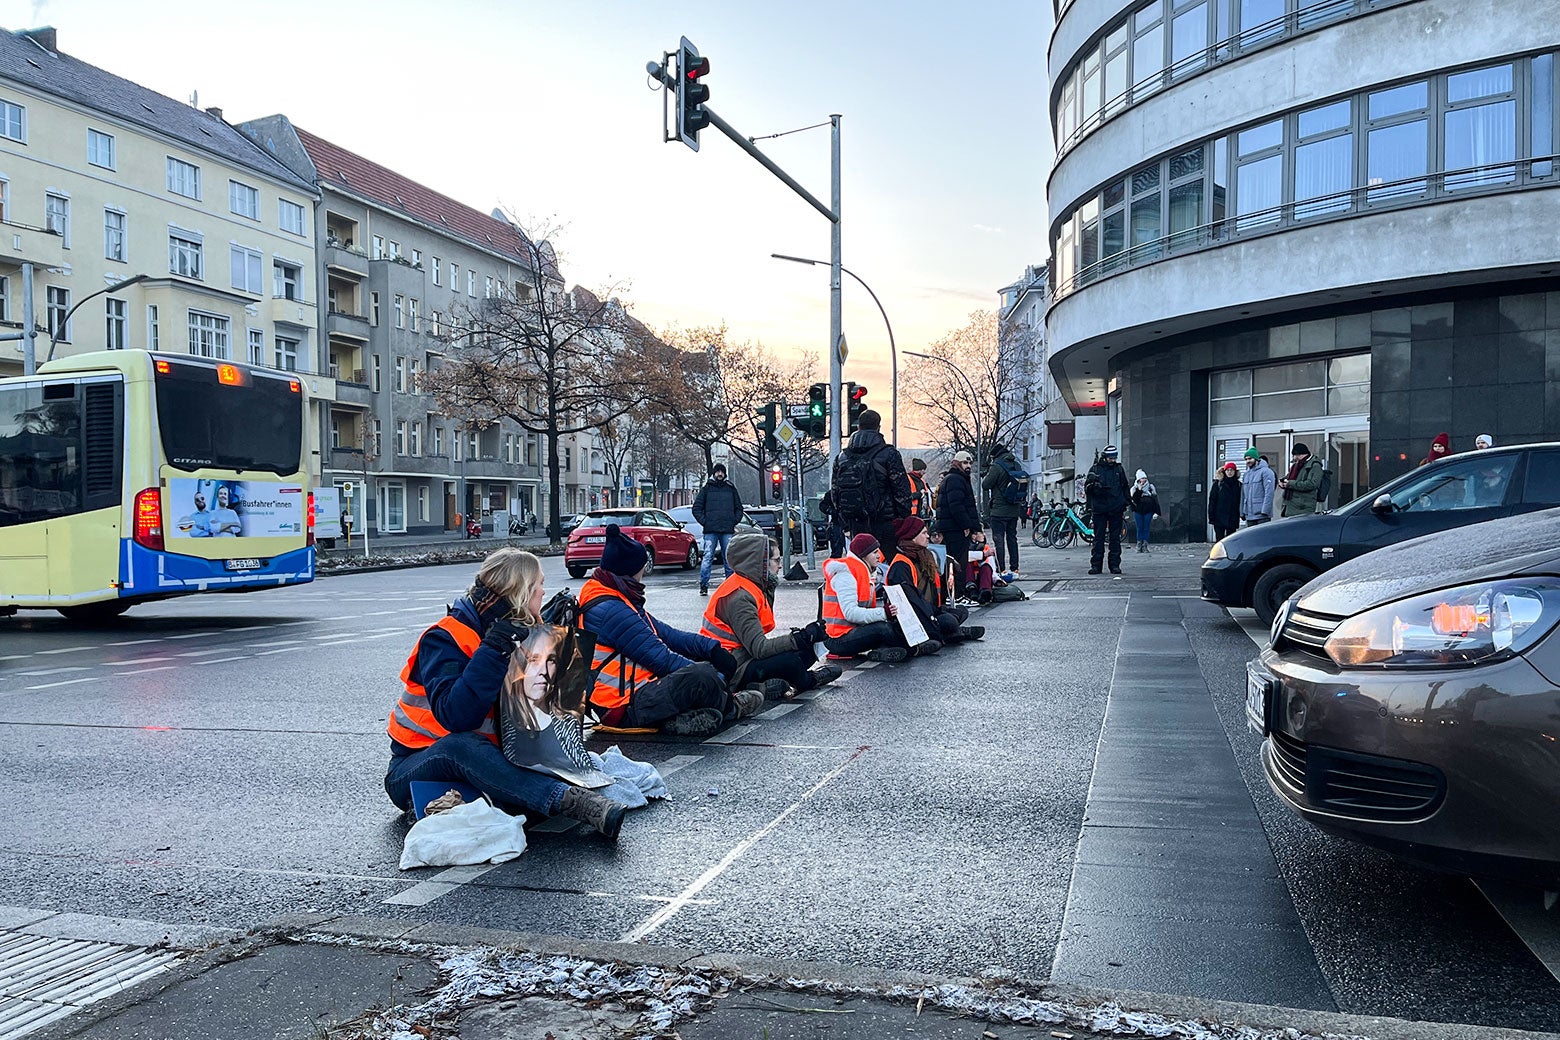 Activists from Letzte Generation block morning rush hour traffic at a Berlin intersection on December 16, one of dozens of demonstrations the group staged in Germany's capital that month.